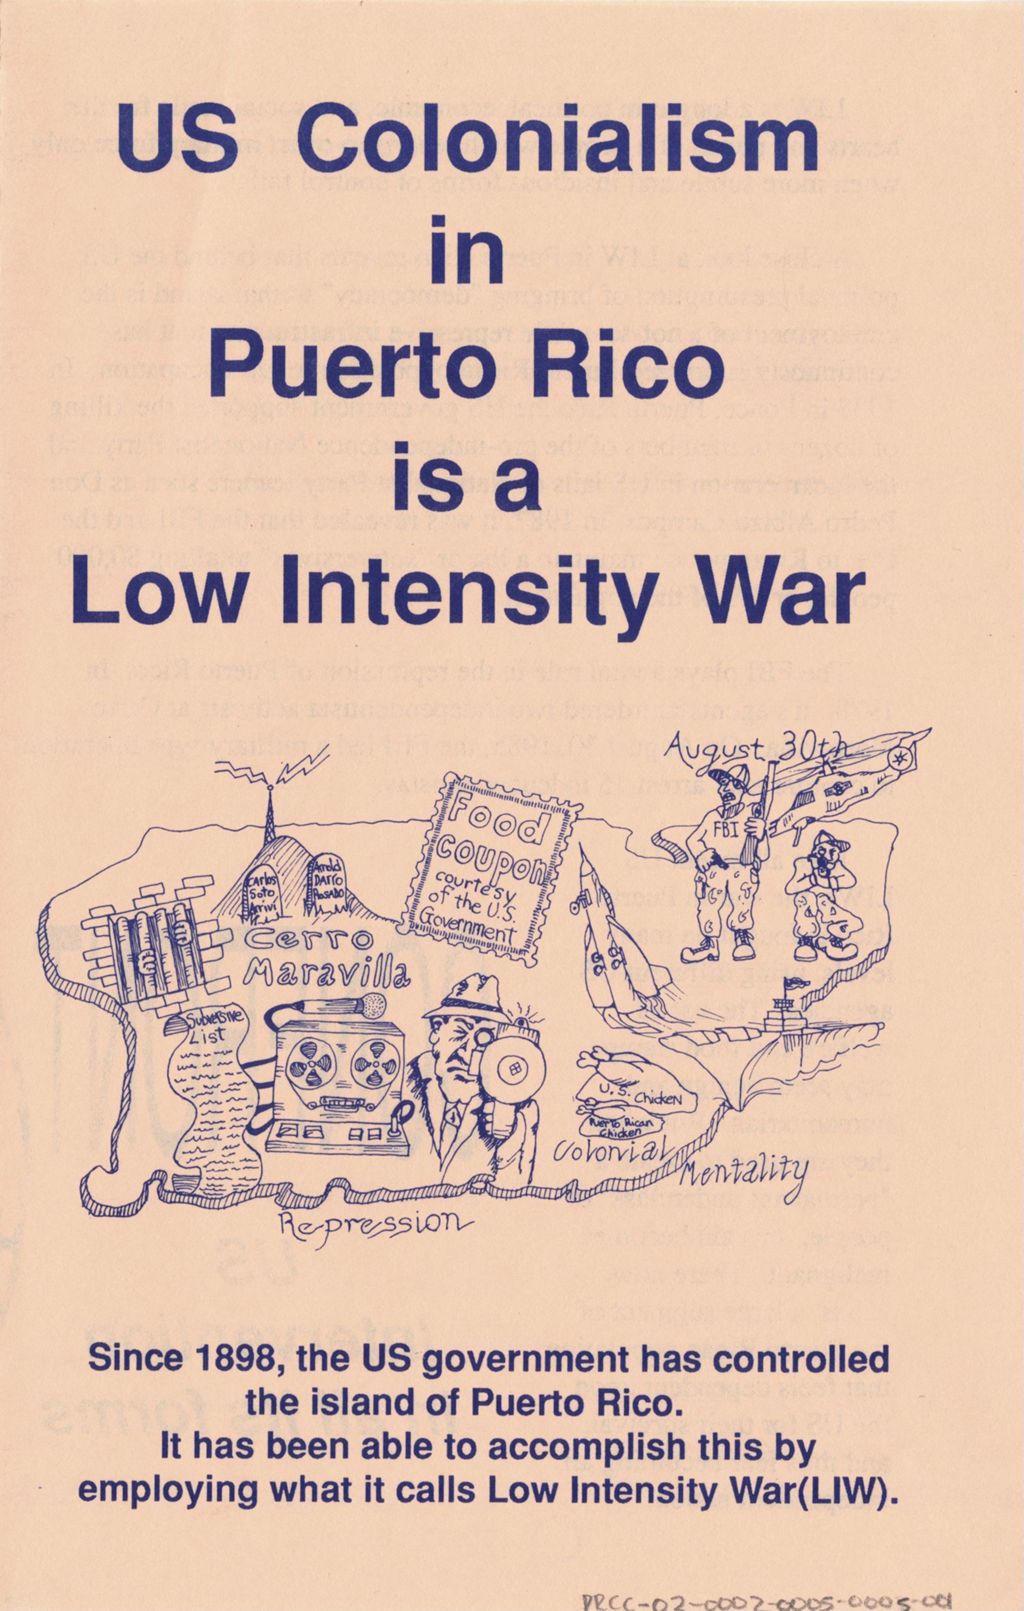 Miniature of US Colonialism in Puerto Rico is a Low Intensity War